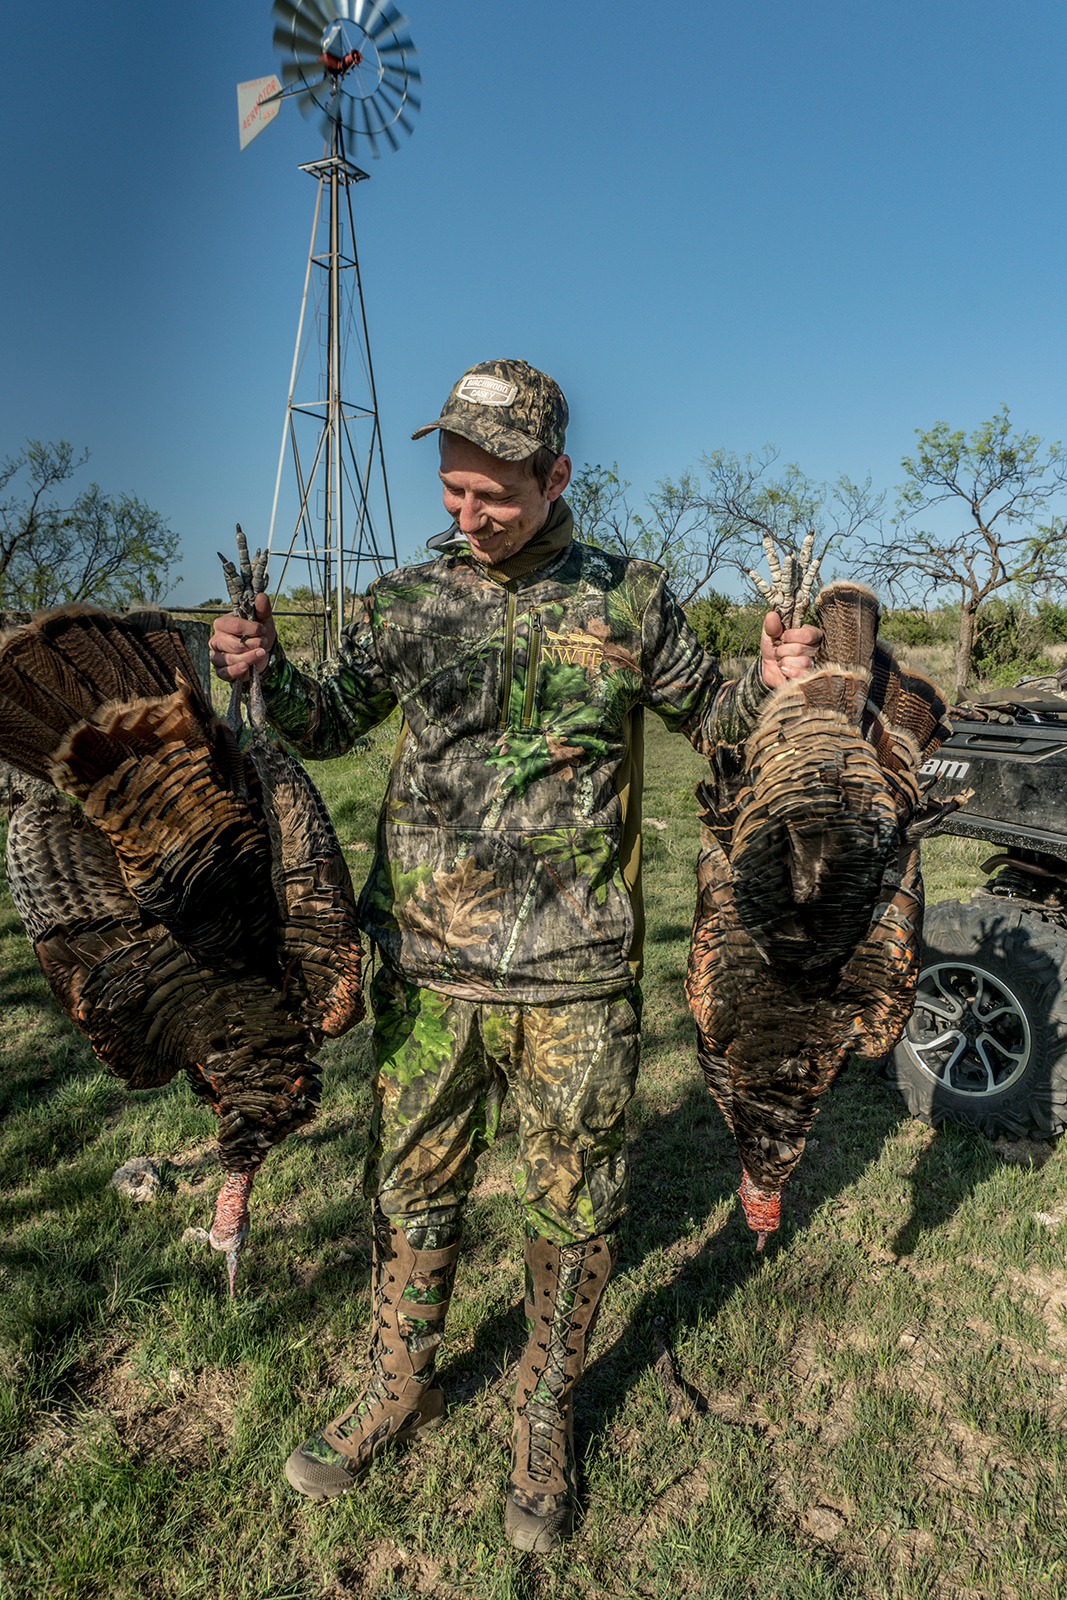 Turkey Grand Slam: All the Species Needed to Accomplish the Goal